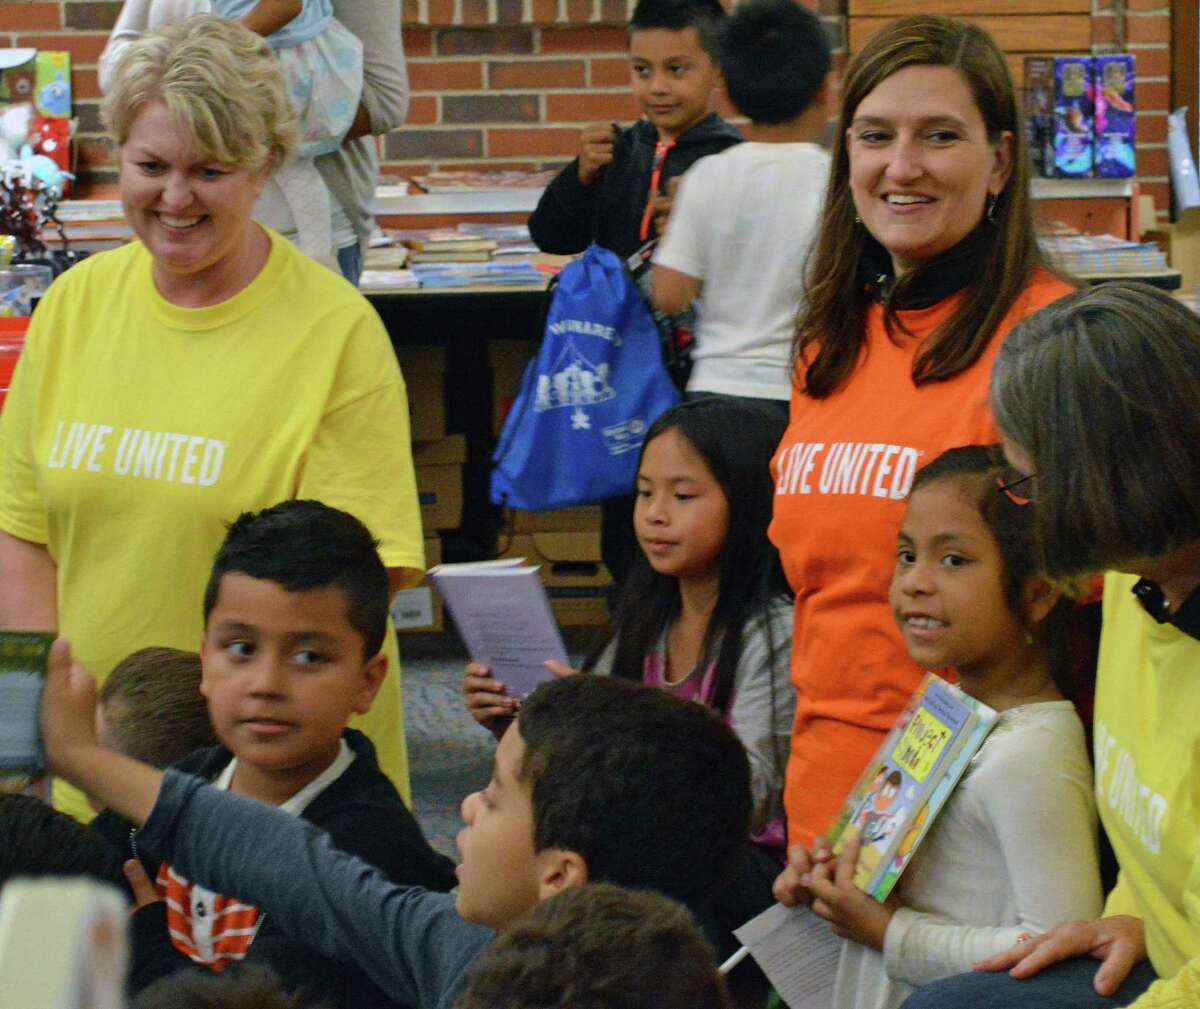 United Way CEO Kimberly Morgan, left, United Way Executive Vice President Isabel Almeida, and Cindy Merkle, president and CEO of Union Savings Bank and chair of United Way’s board of directors, help deliver drawstring backpacks to second graders at South Street School as part of United Way’s Day of Action on June 6.